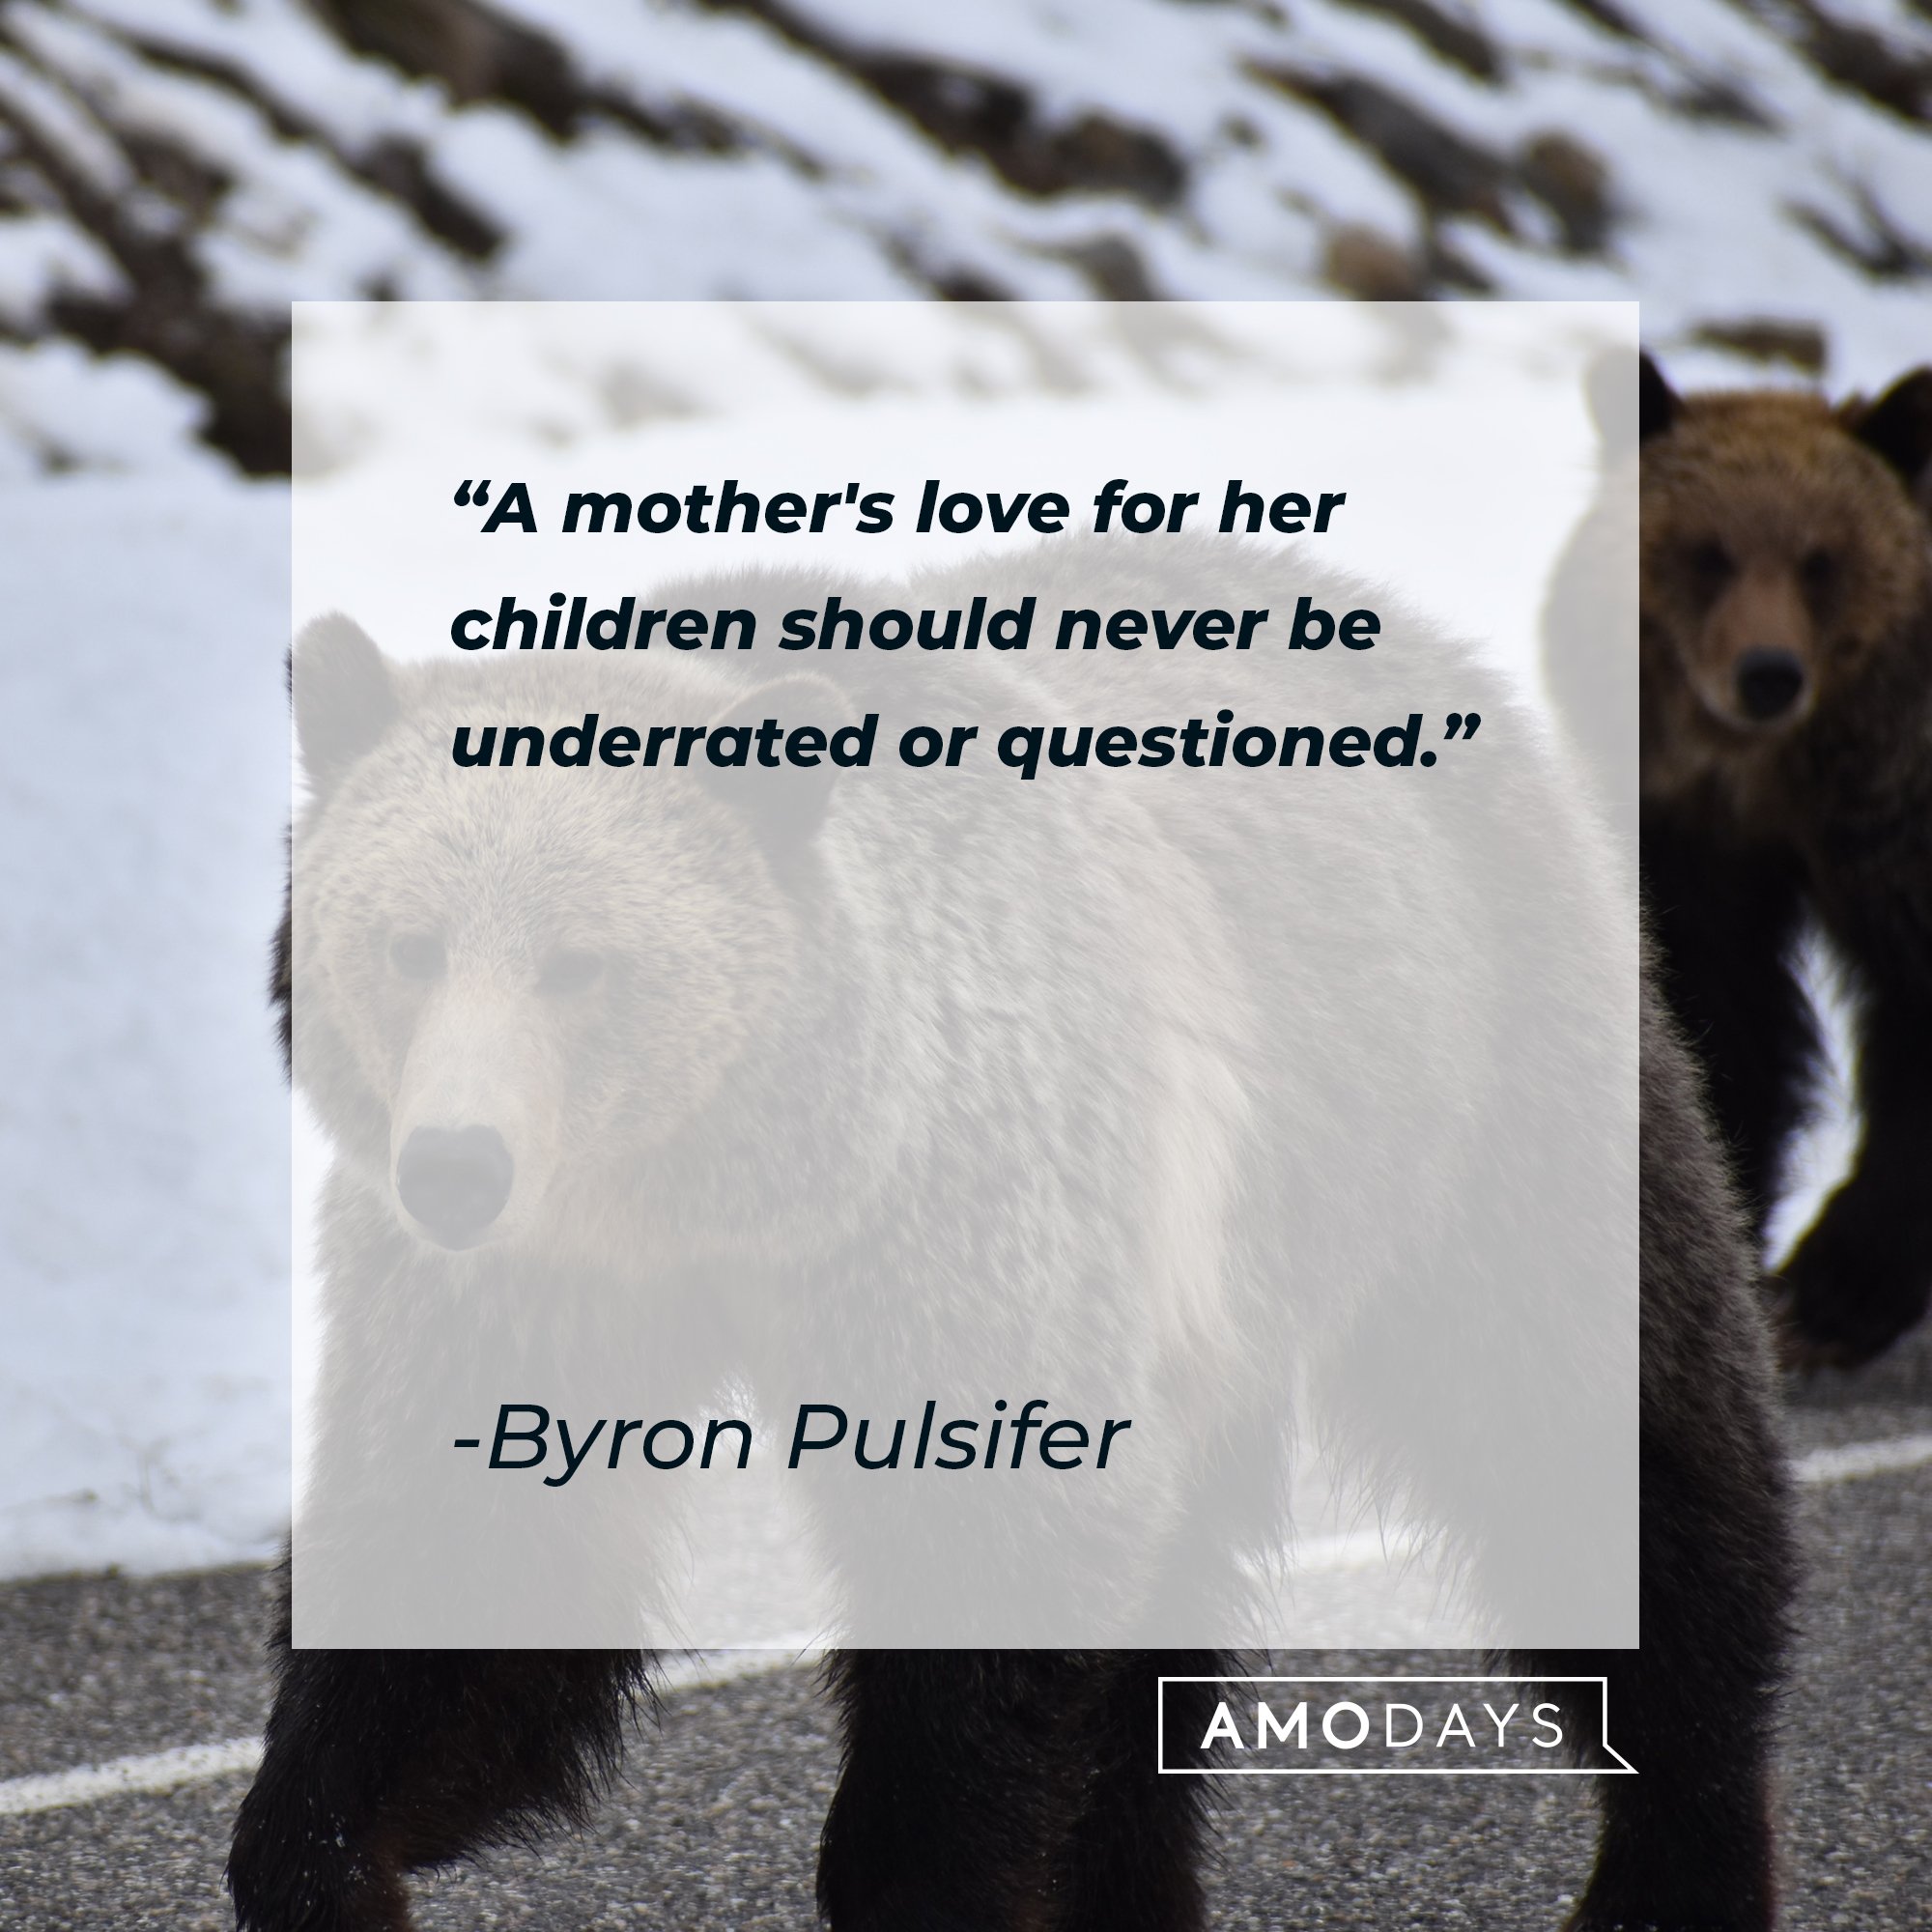 Byron Pulsifer's quote: "A mother's love for her children should never be underrated or questioned." | Image: AmoDays